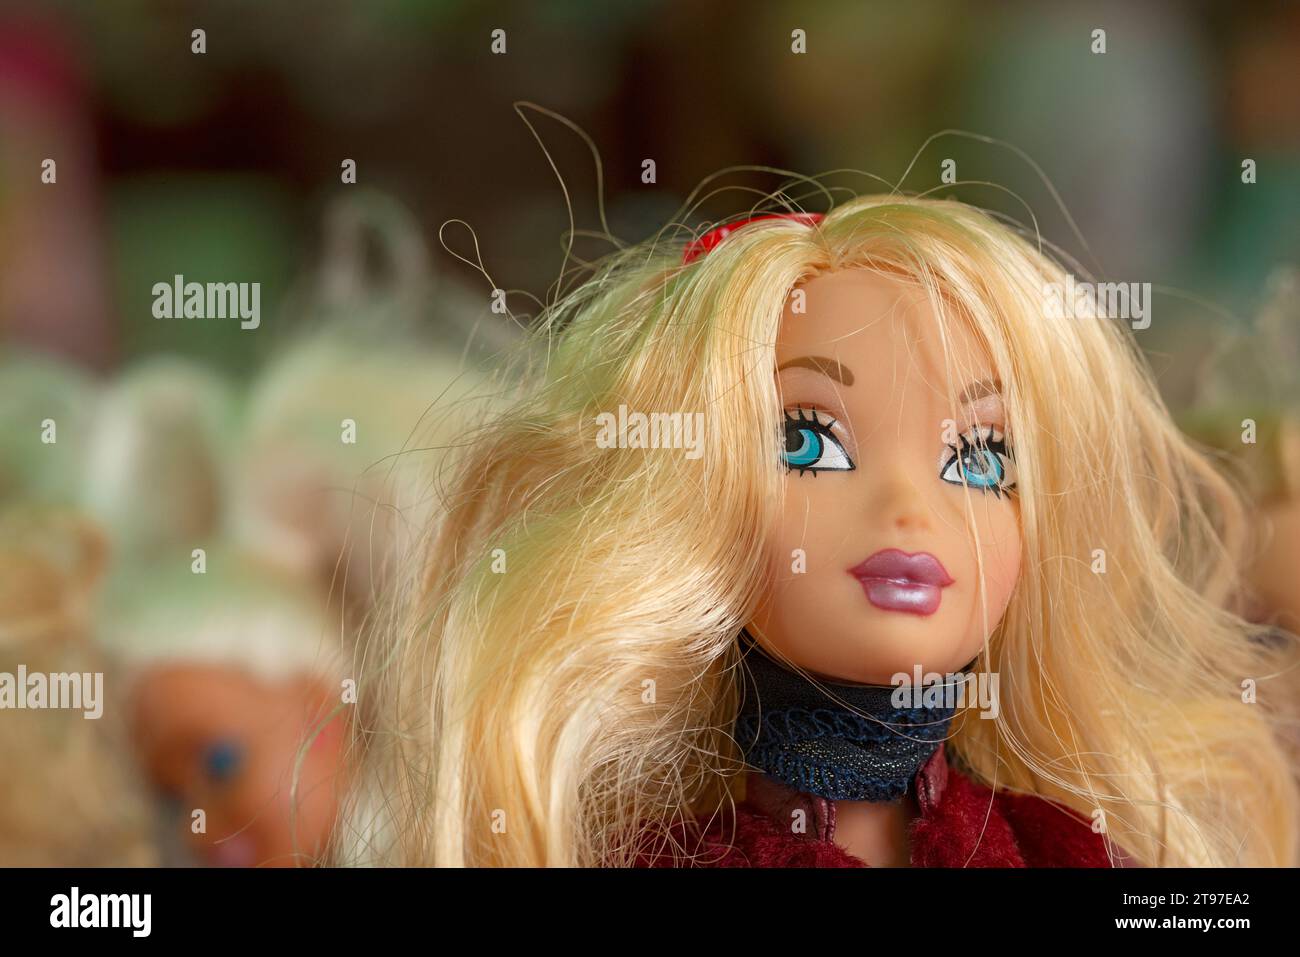 Close-up of a Doll Face with Blonde Hair Stock Photo